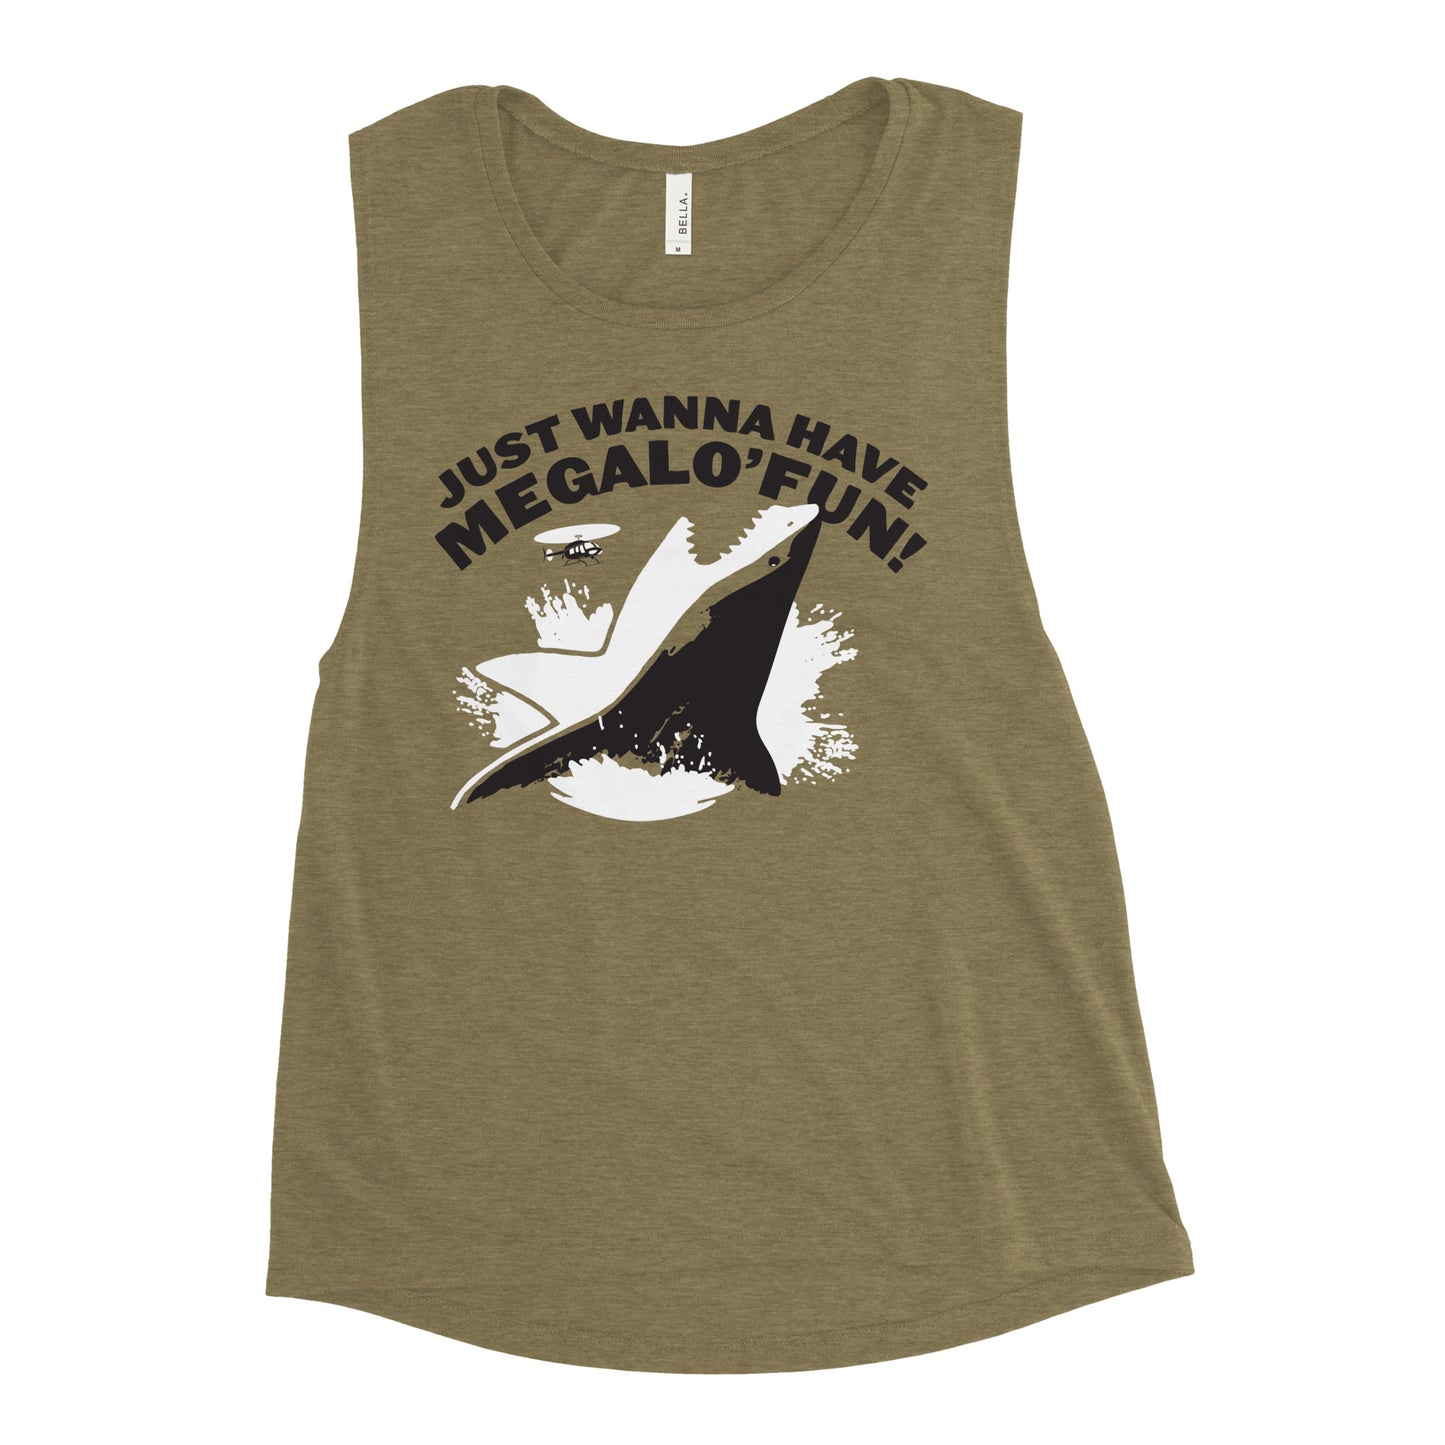 Just Wanna Have Megalo' Fun! Women's Muscle Tank